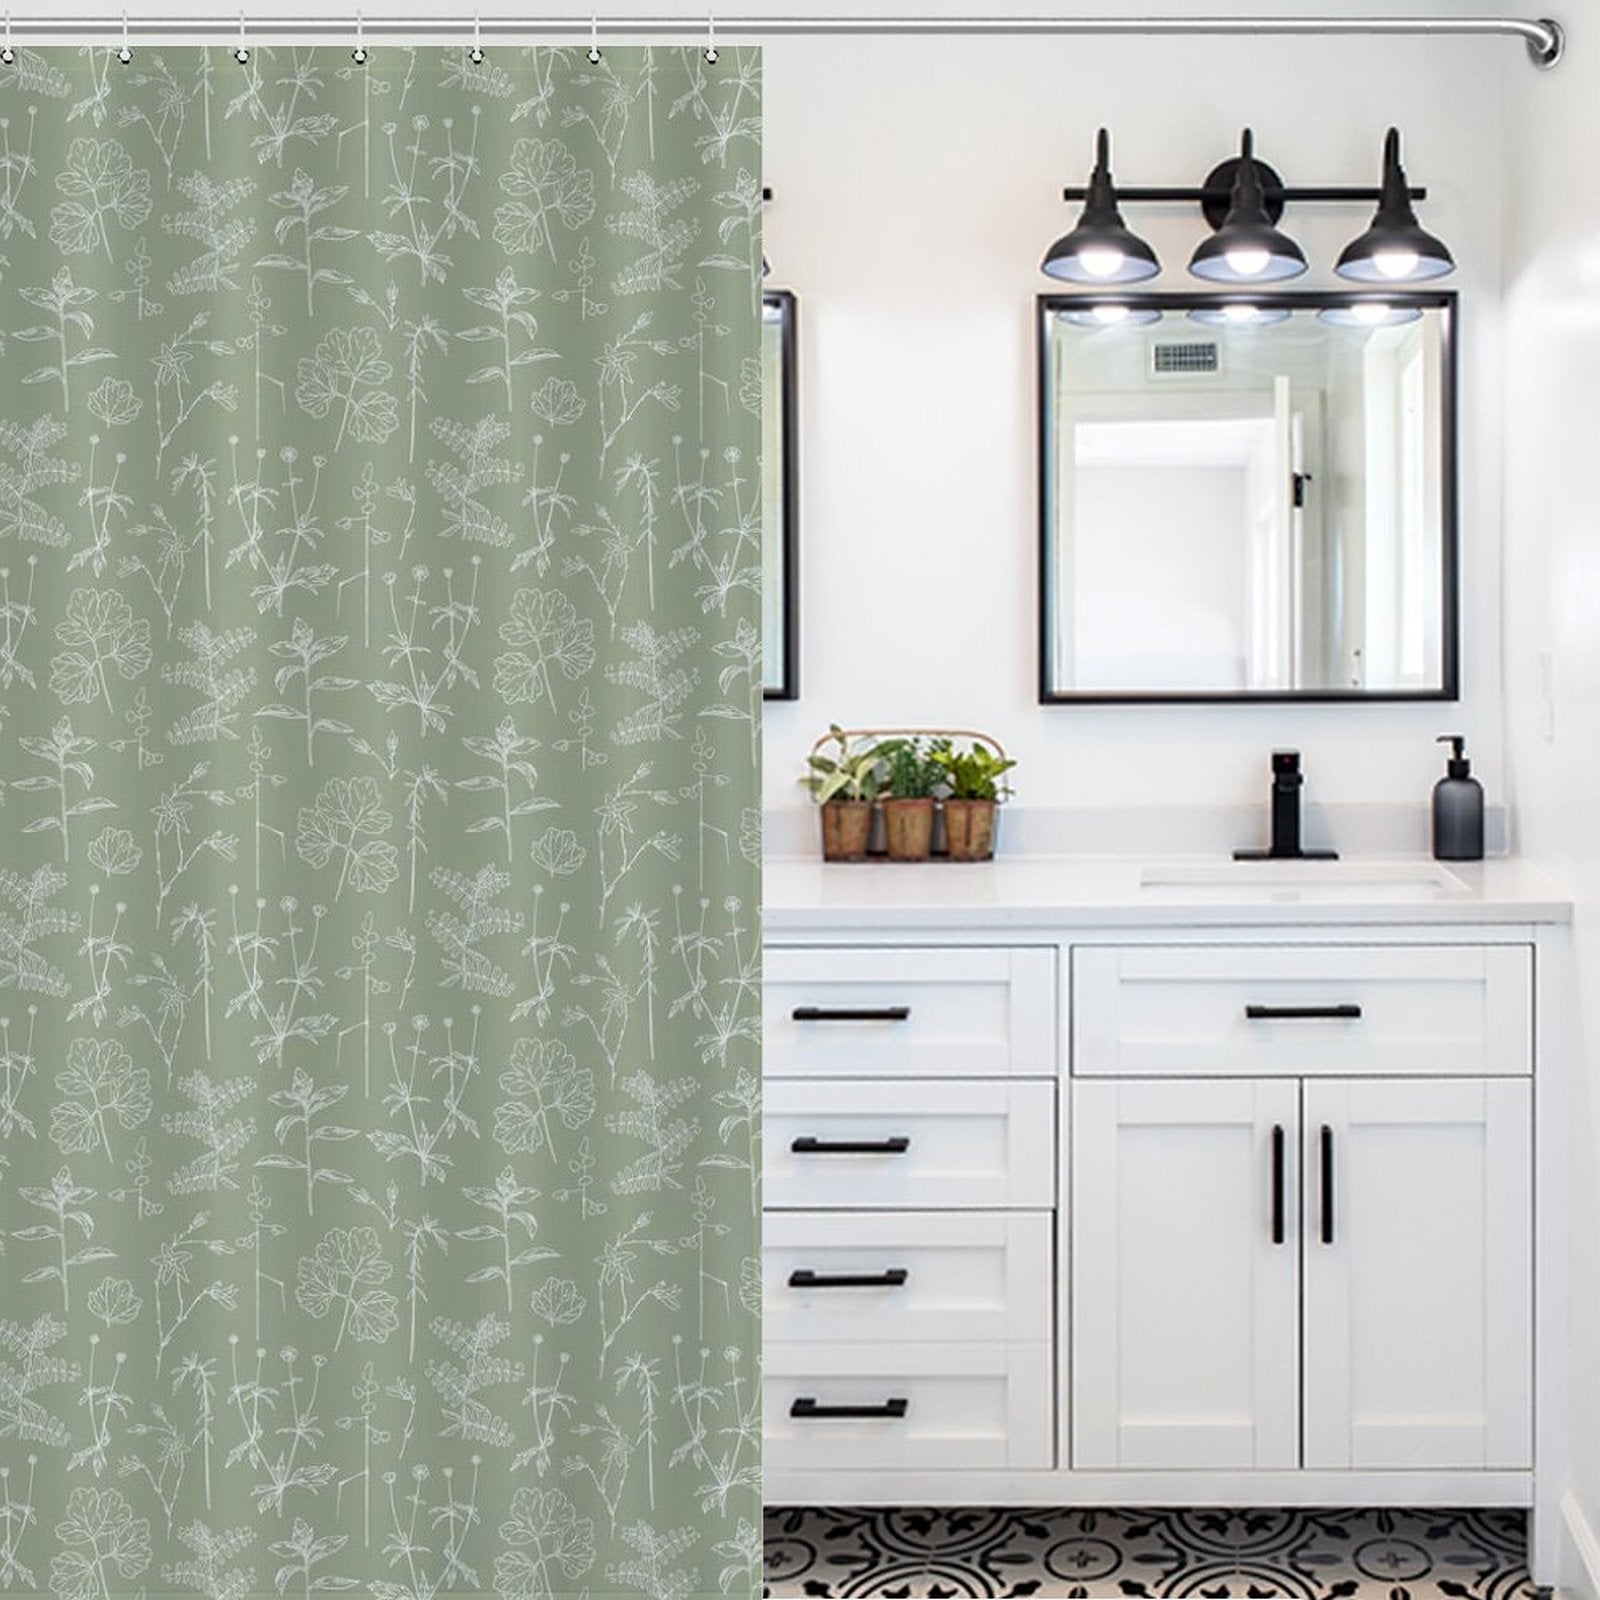 Bathroom with a white vanity, black hardware, dual sinks, and a Boho Retro Sage Green Herbs Flower Shower Curtain-Cottoncat. Above the vanity are two mirrors and a three-light fixture. The floor has a patterned design.
